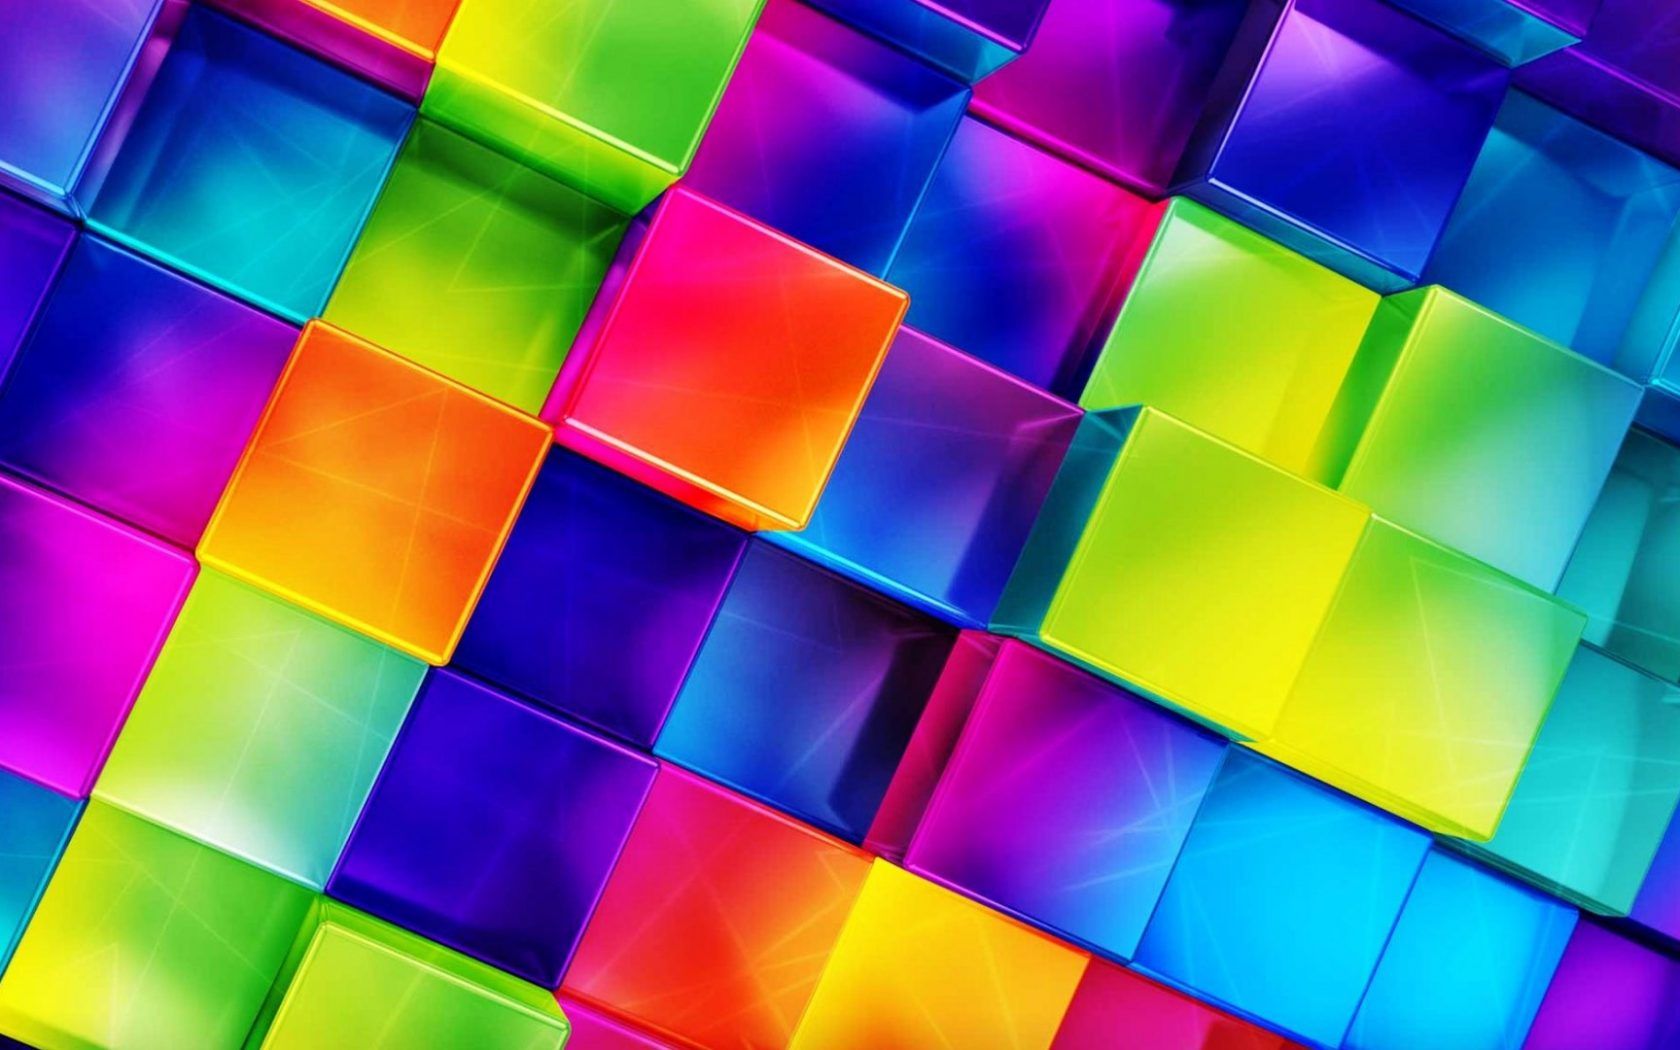 Bright Colorful Abstract Wallpaper HD FREE HD WALLPAPERS